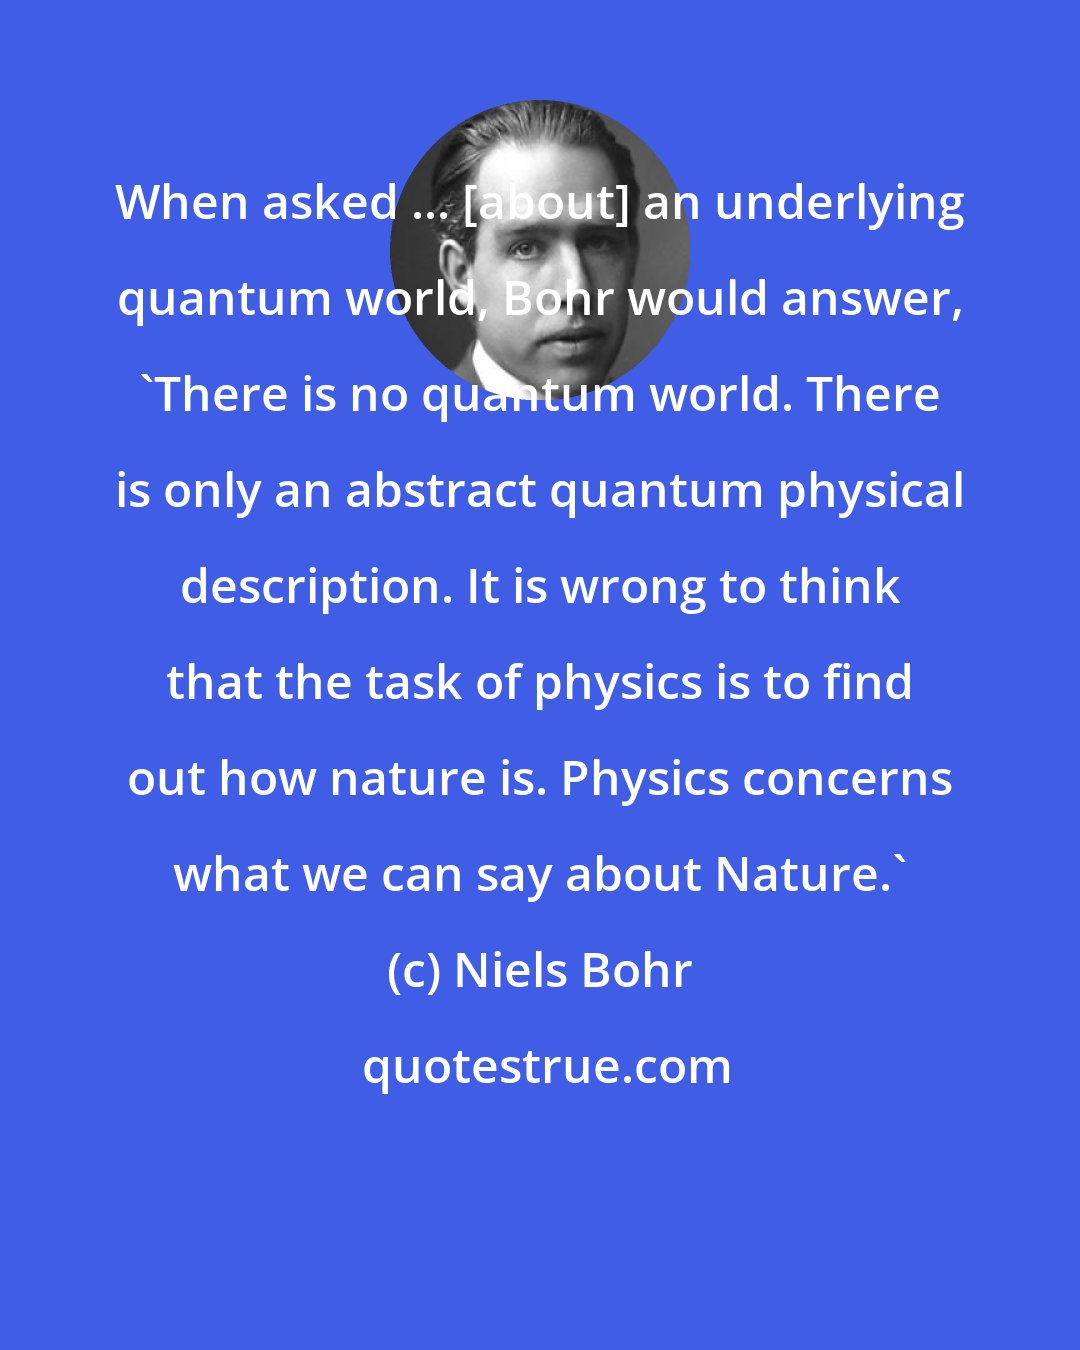 Niels Bohr: When asked ... [about] an underlying quantum world, Bohr would answer, 'There is no quantum world. There is only an abstract quantum physical description. It is wrong to think that the task of physics is to find out how nature is. Physics concerns what we can say about Nature.'